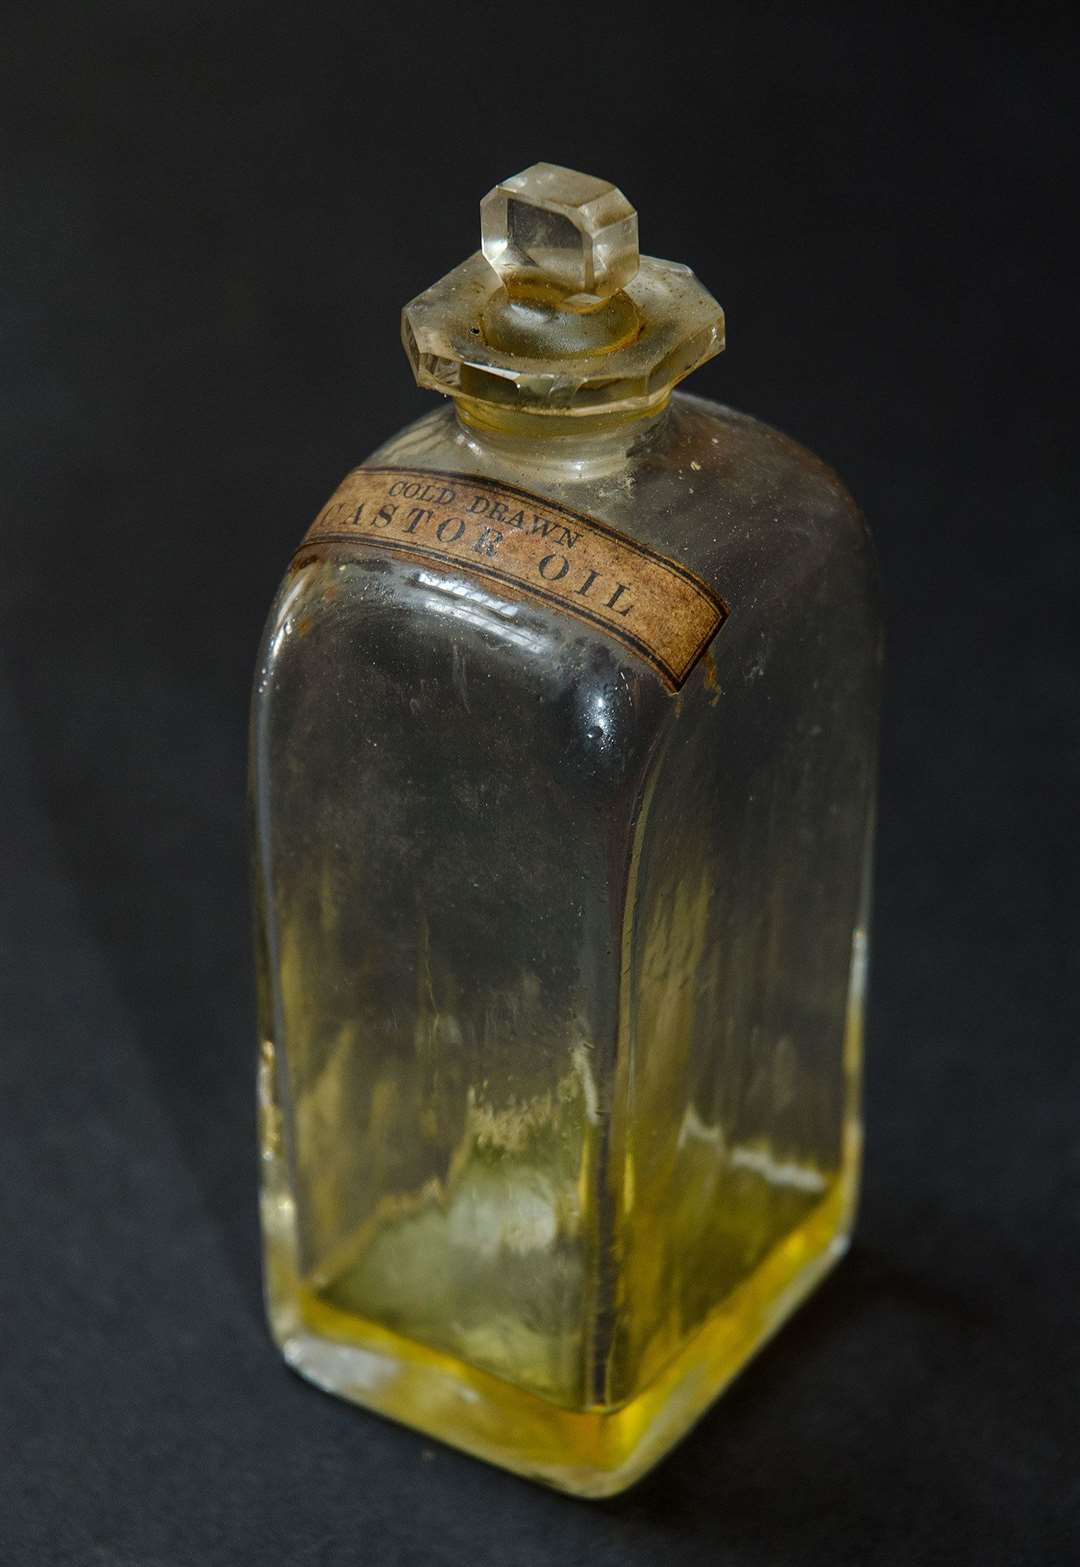 Castor oil (1800s): In the 1800s castor oil was viewed as a miracle cure for almost every ailment. It was one of the most common medicines sold by travelling quacks when they visited the Highlands. Due to its use as a quick-working laxative, castor oil was sometimes used as a humiliating punishment, notably in Fascist Italy when Mussolini’s power was said to be backed by ‘the bludgeon and castor oil’.